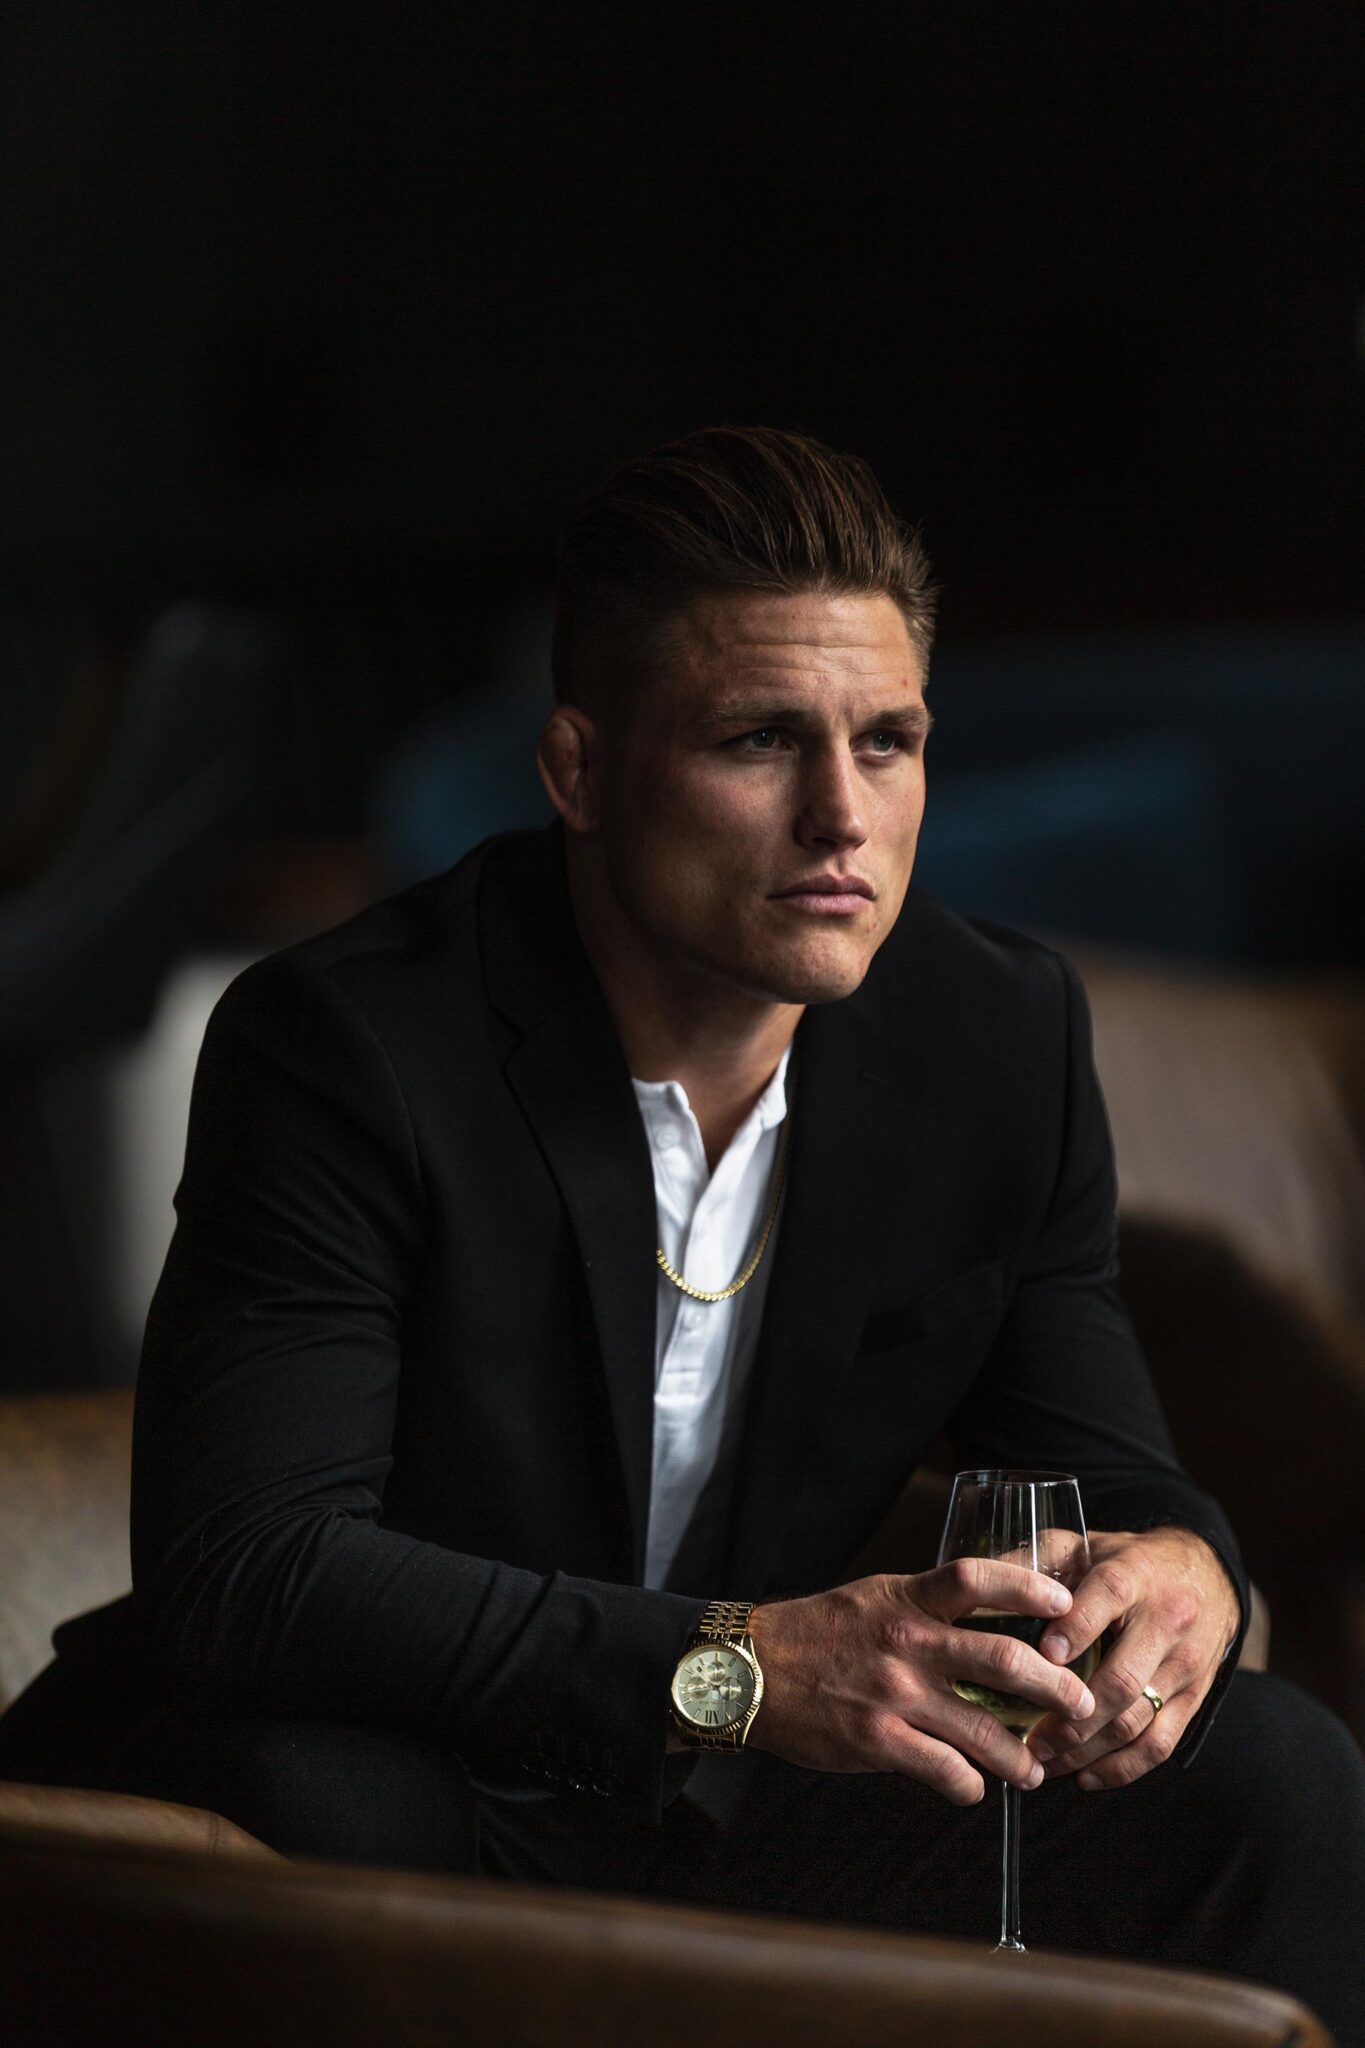 A portrait photograph of by Jeff Fried of UFC Fighter, Drew Dober looking like James Bond